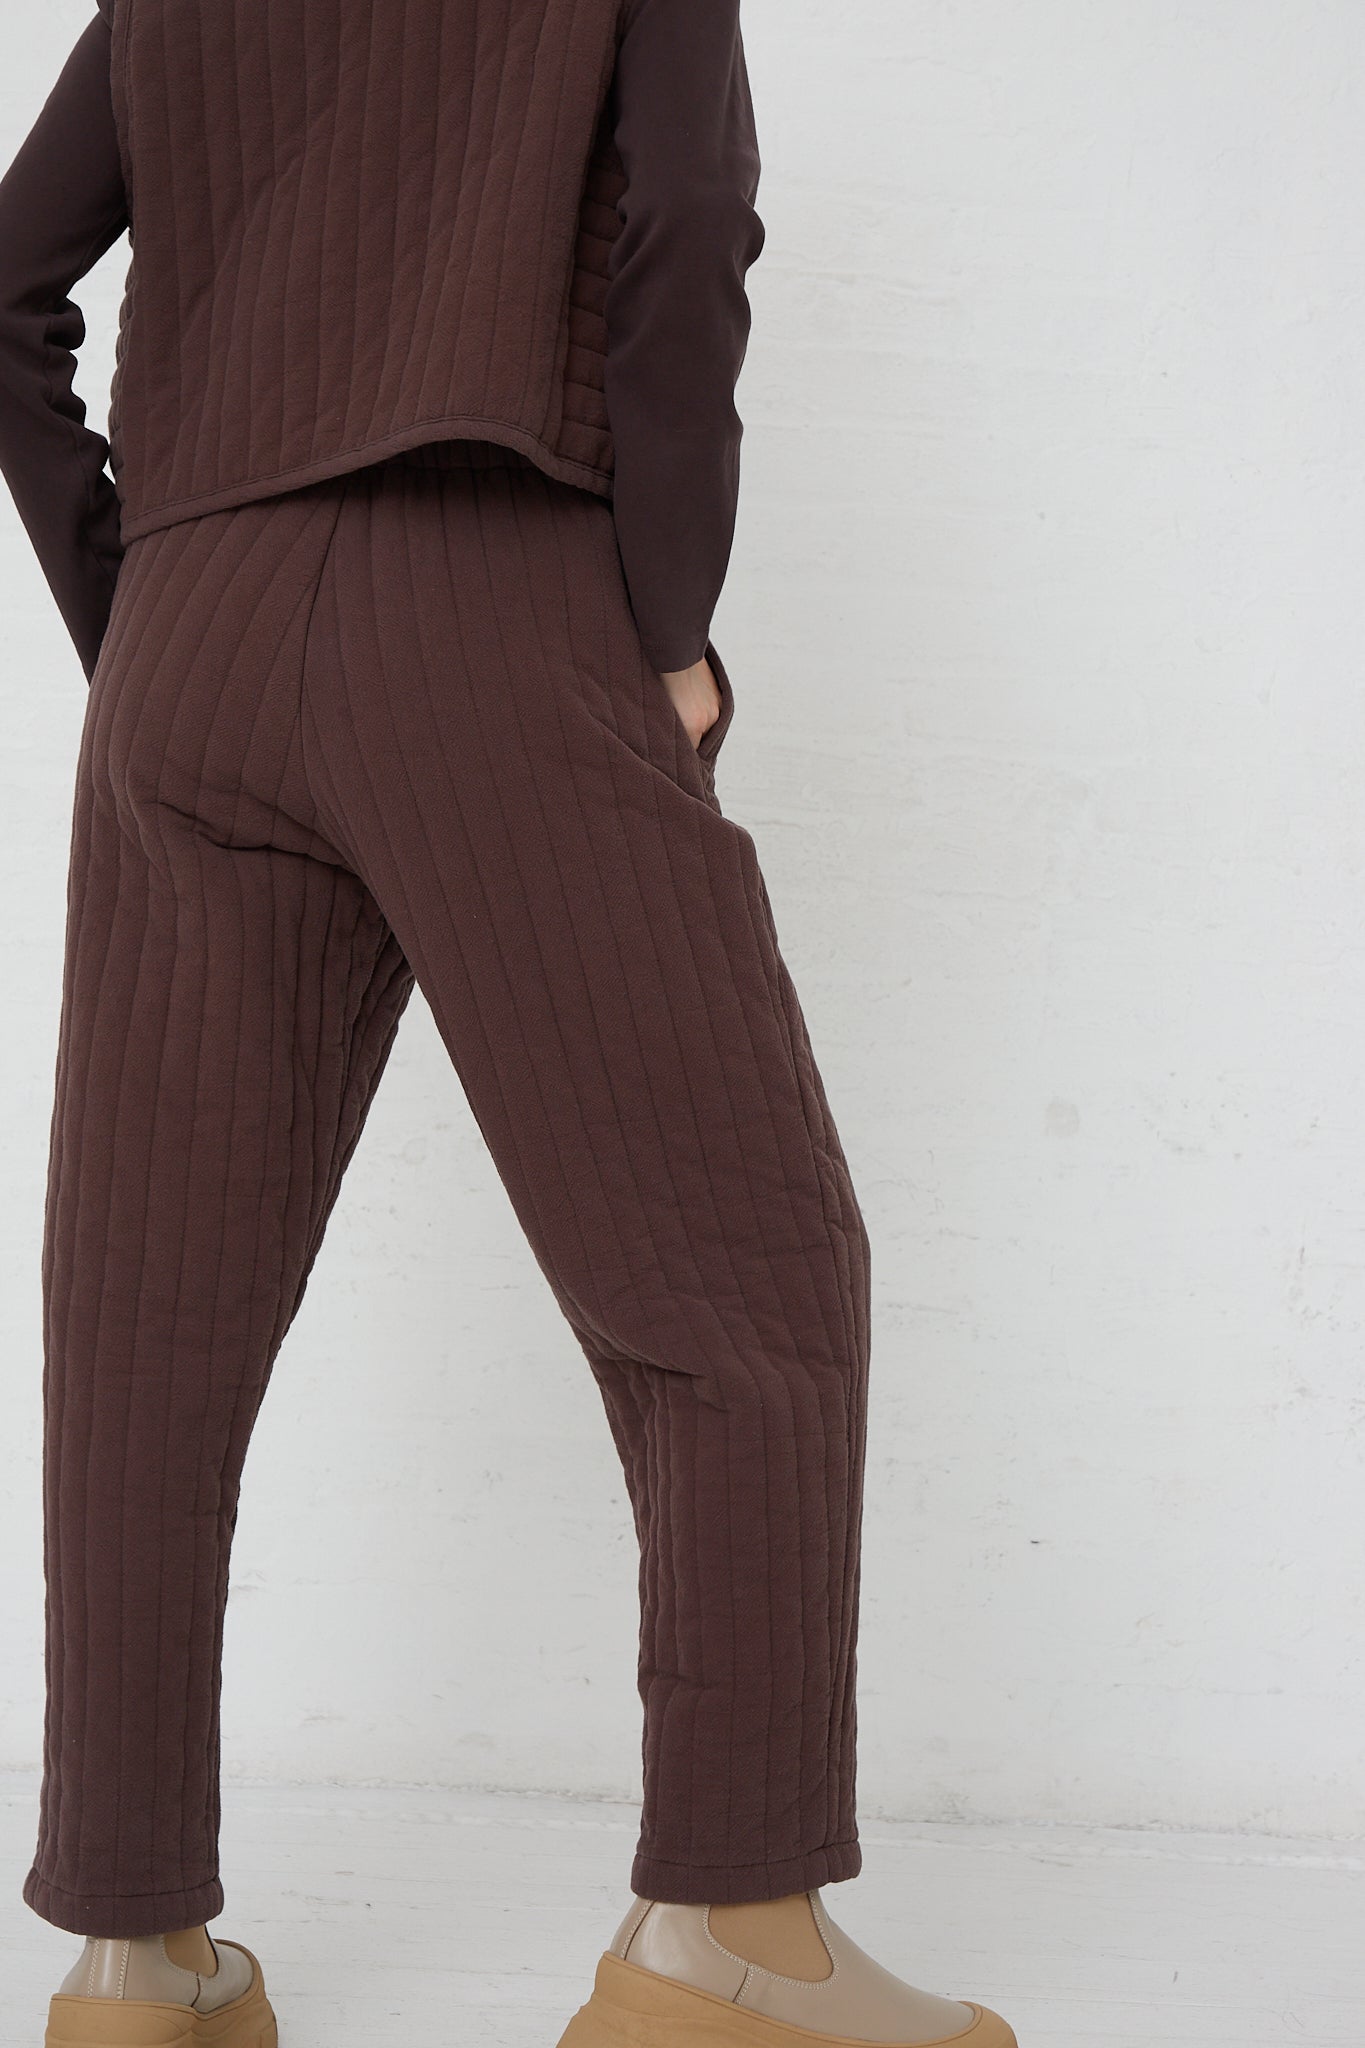 The back of a woman wearing Black Crane's Quilted Easy Pants in Plum, in a relaxed fit.